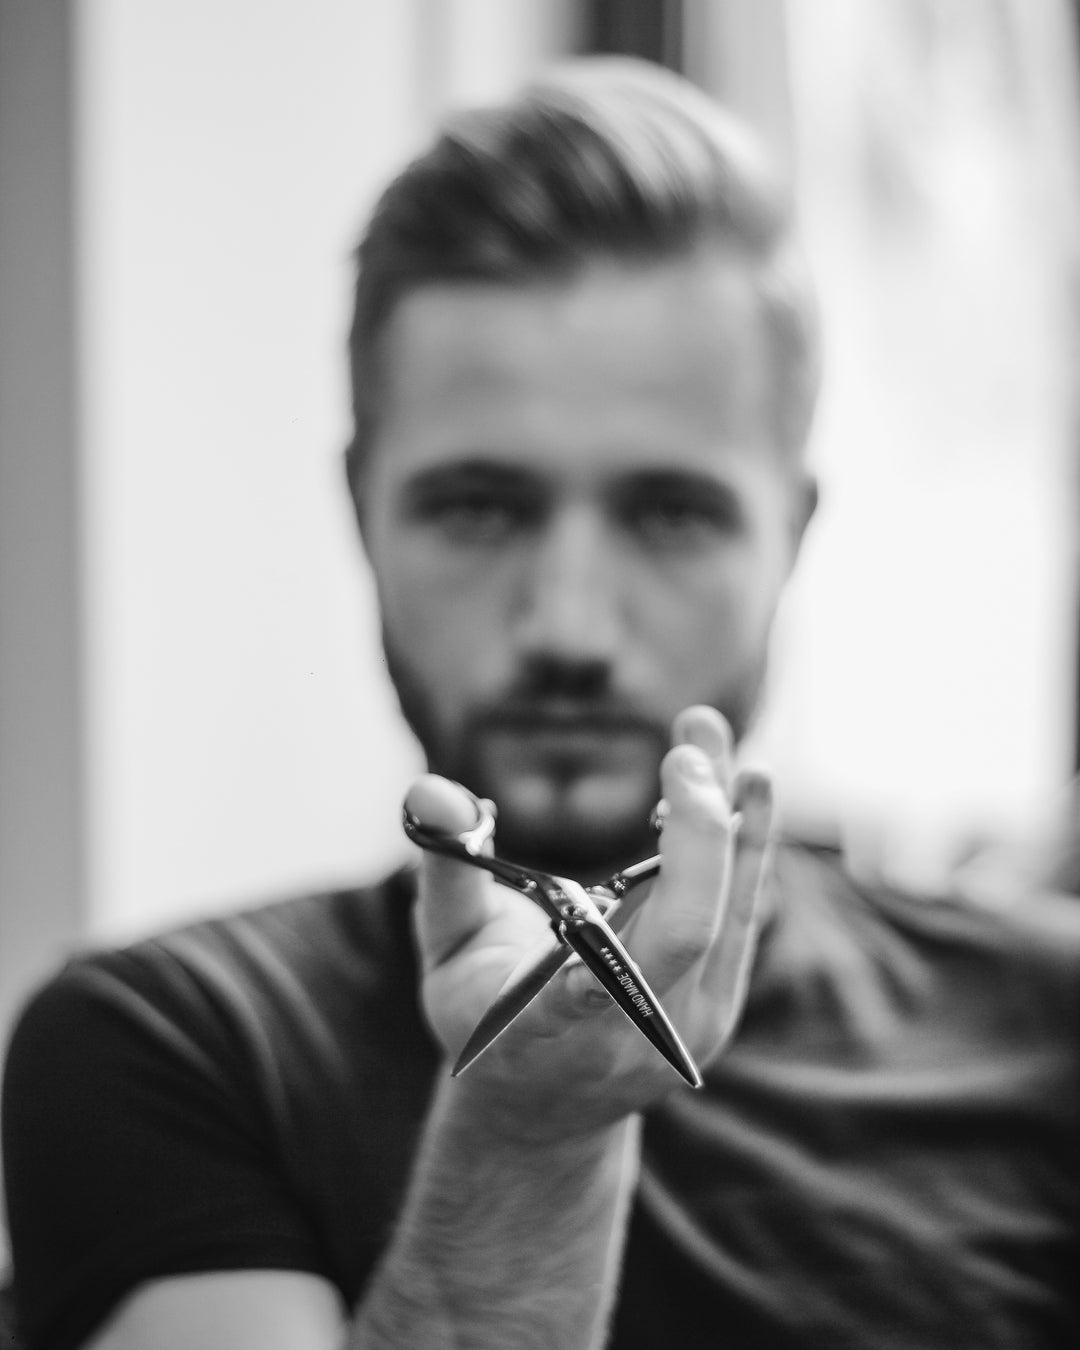 Moda for Men: 3 Easy Ways to Update Your Grooming Routine